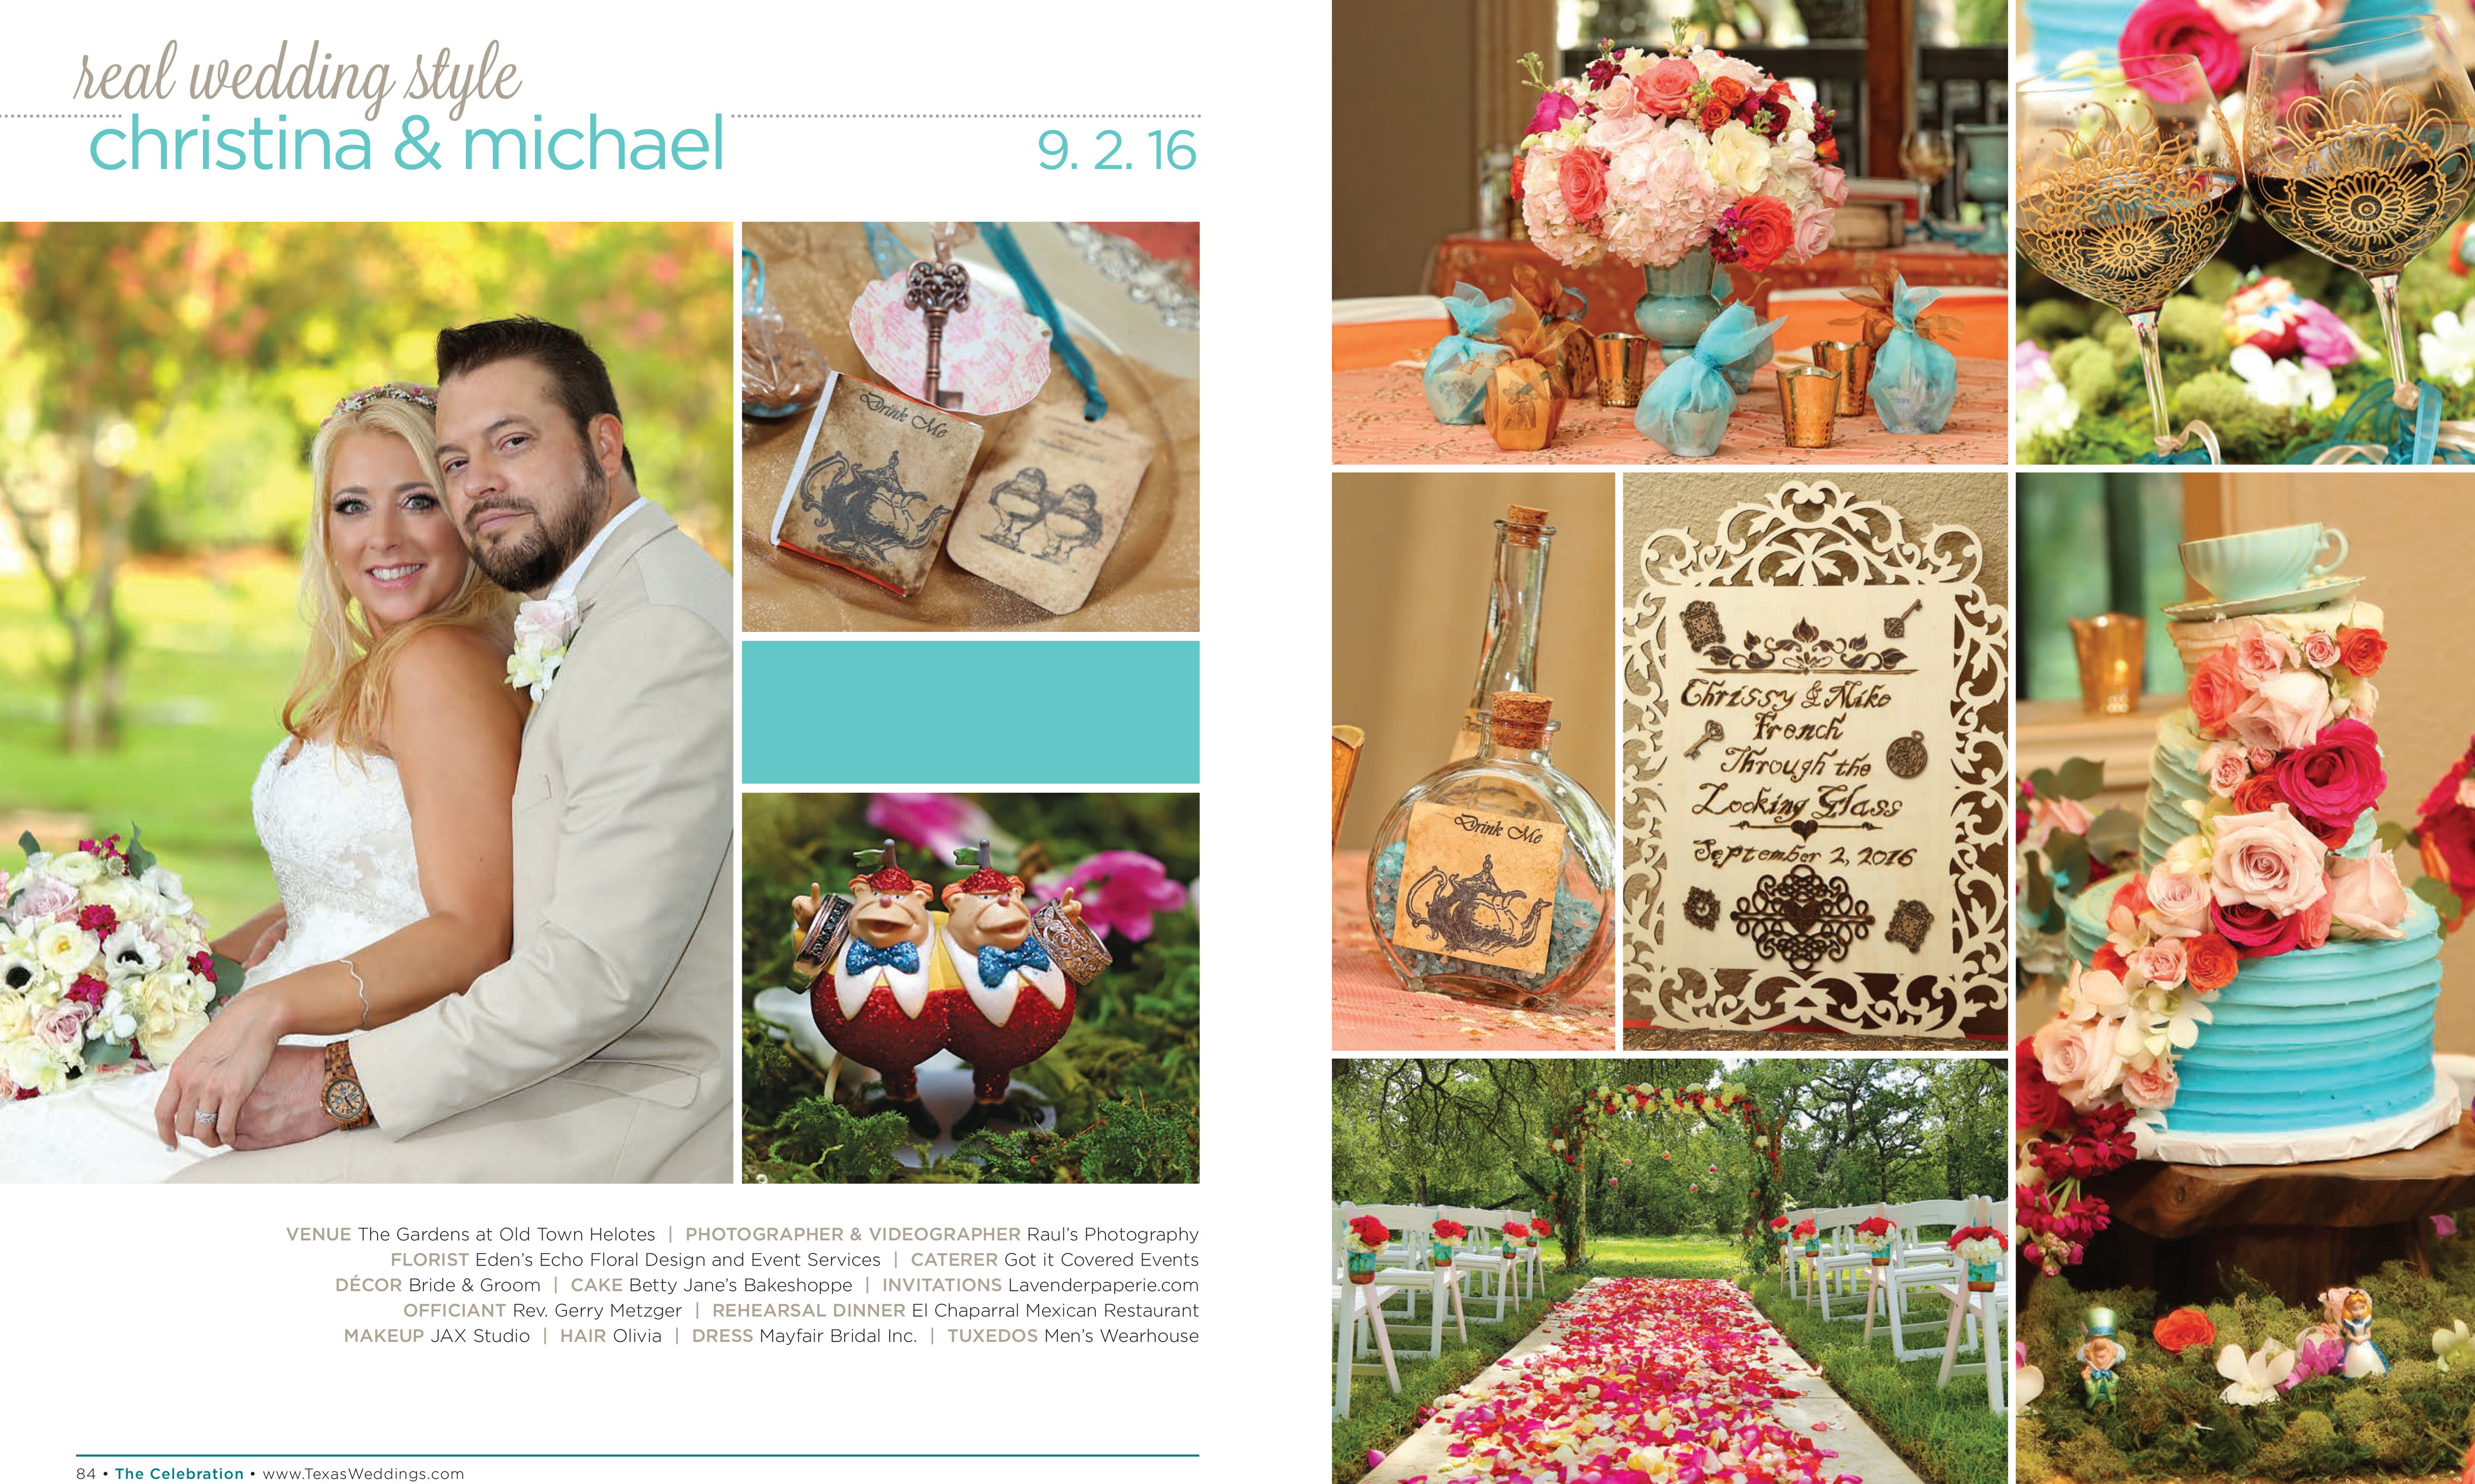 Christina & Michael in their Real Wedding Page in the Spring/Summer 2017 Texas Wedding Guide